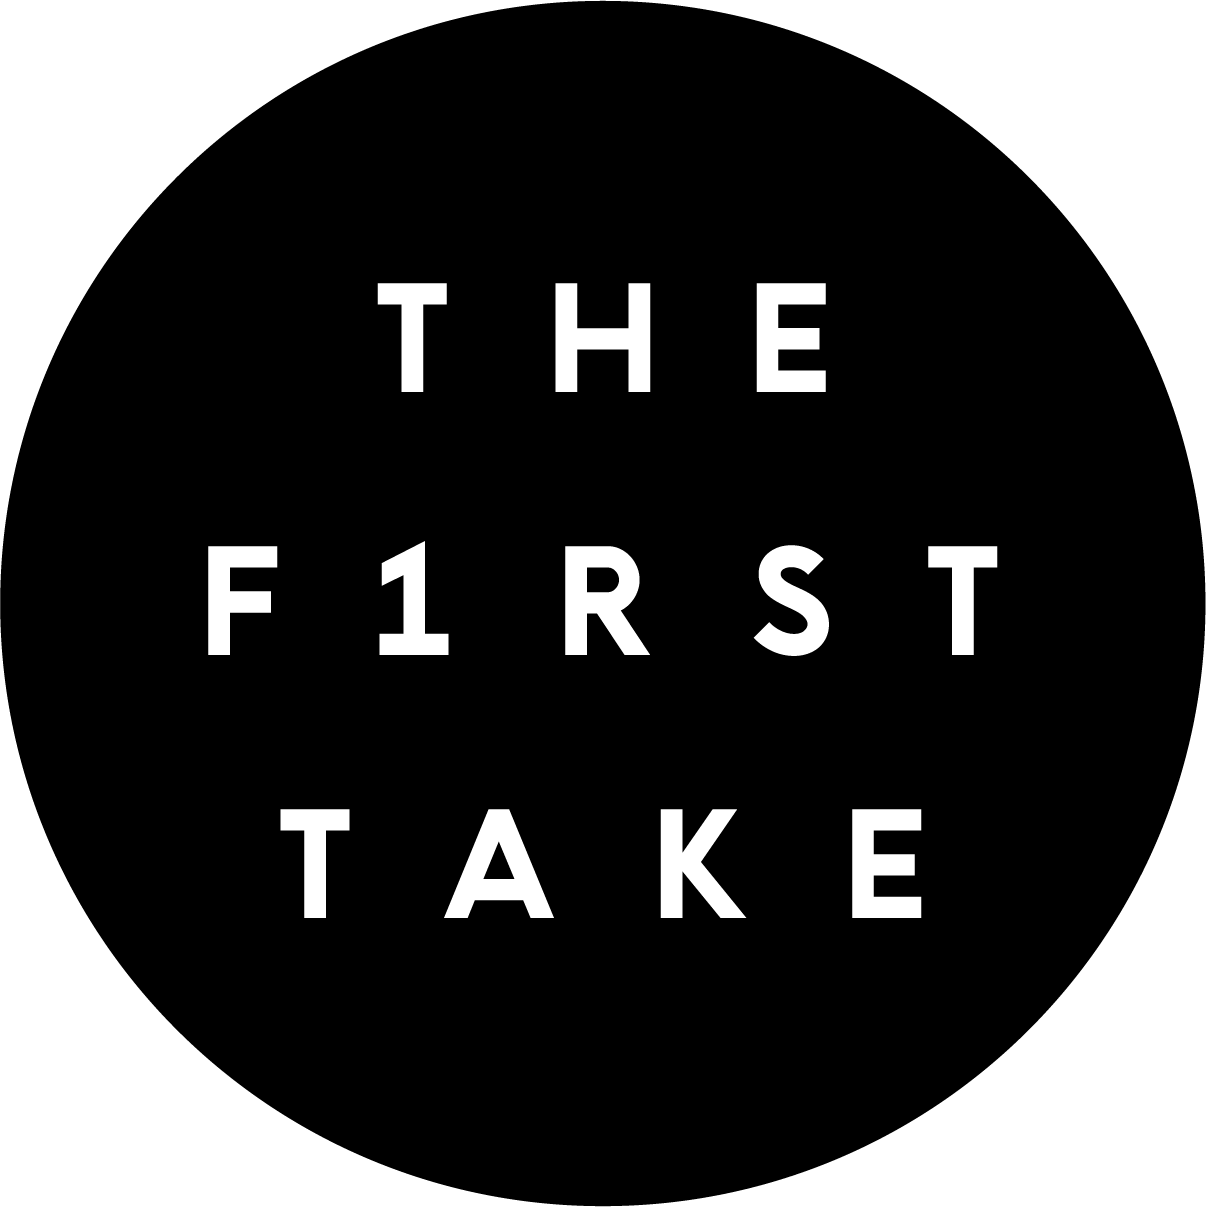 Skoop On Somebody、『THE FIRST TAKE』に初登場！ 人気曲「sha la la」を一発撮りパフォーマンス - 画像一覧（1/2）